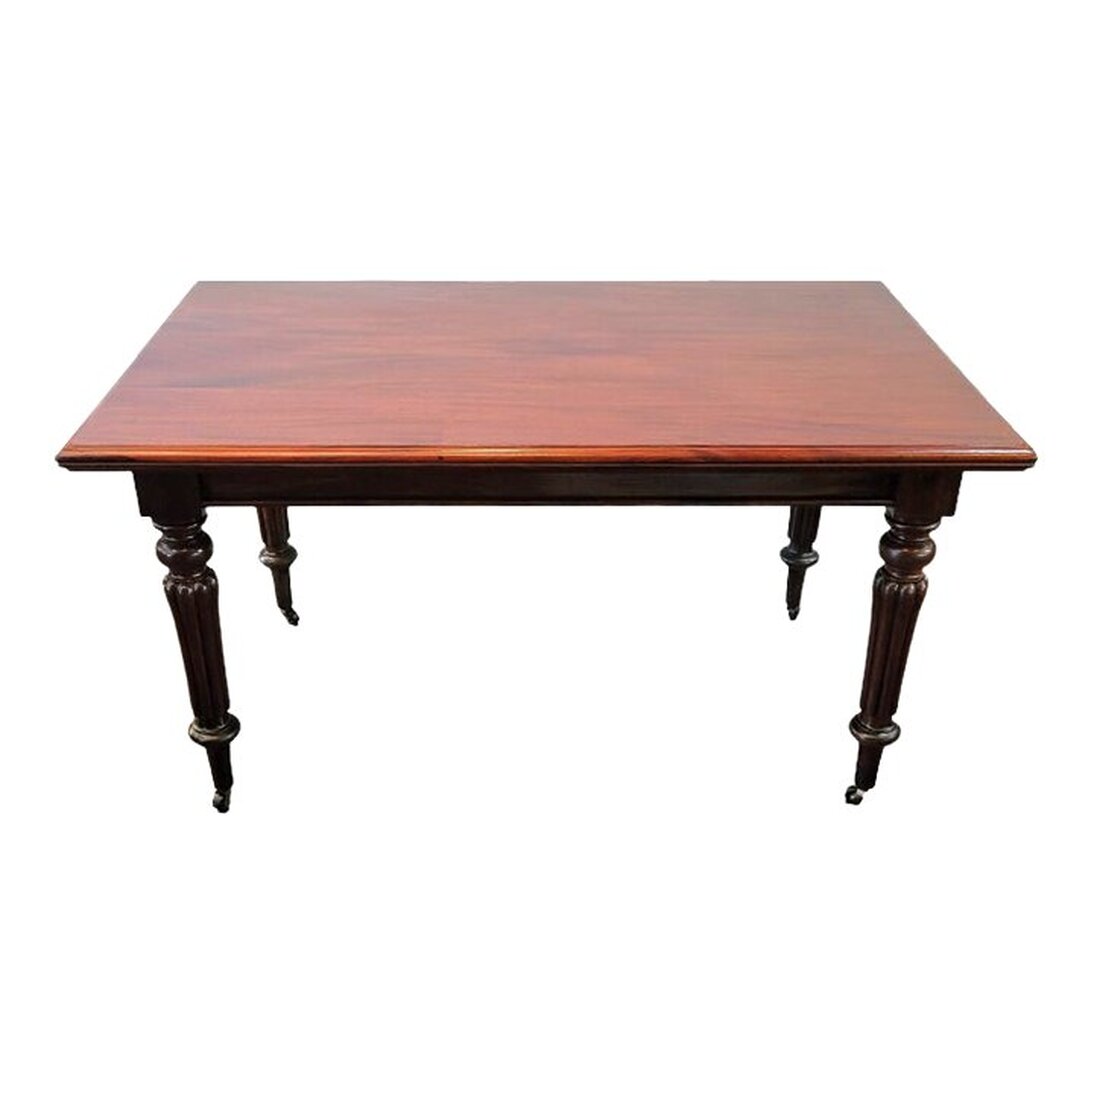 Antique Santo Domingo mahogany table attributed to Gillows of Lancaster works perfectly as a library table, dining table, café table, writing desk, and work table.  The molded-edge rectangular table top shows off the beautiful qualities of Santo Domingo mahogany wood - the rich color, burled figure, and distinctive ribbon grain common to mahogany.  The plain apron has a molded bottom edge.  The four corner blocks surmount the turned, ringed, and tapered legs. The legs are reeded through the middle. The legs end in tapered arrow feet on castors.  57.25